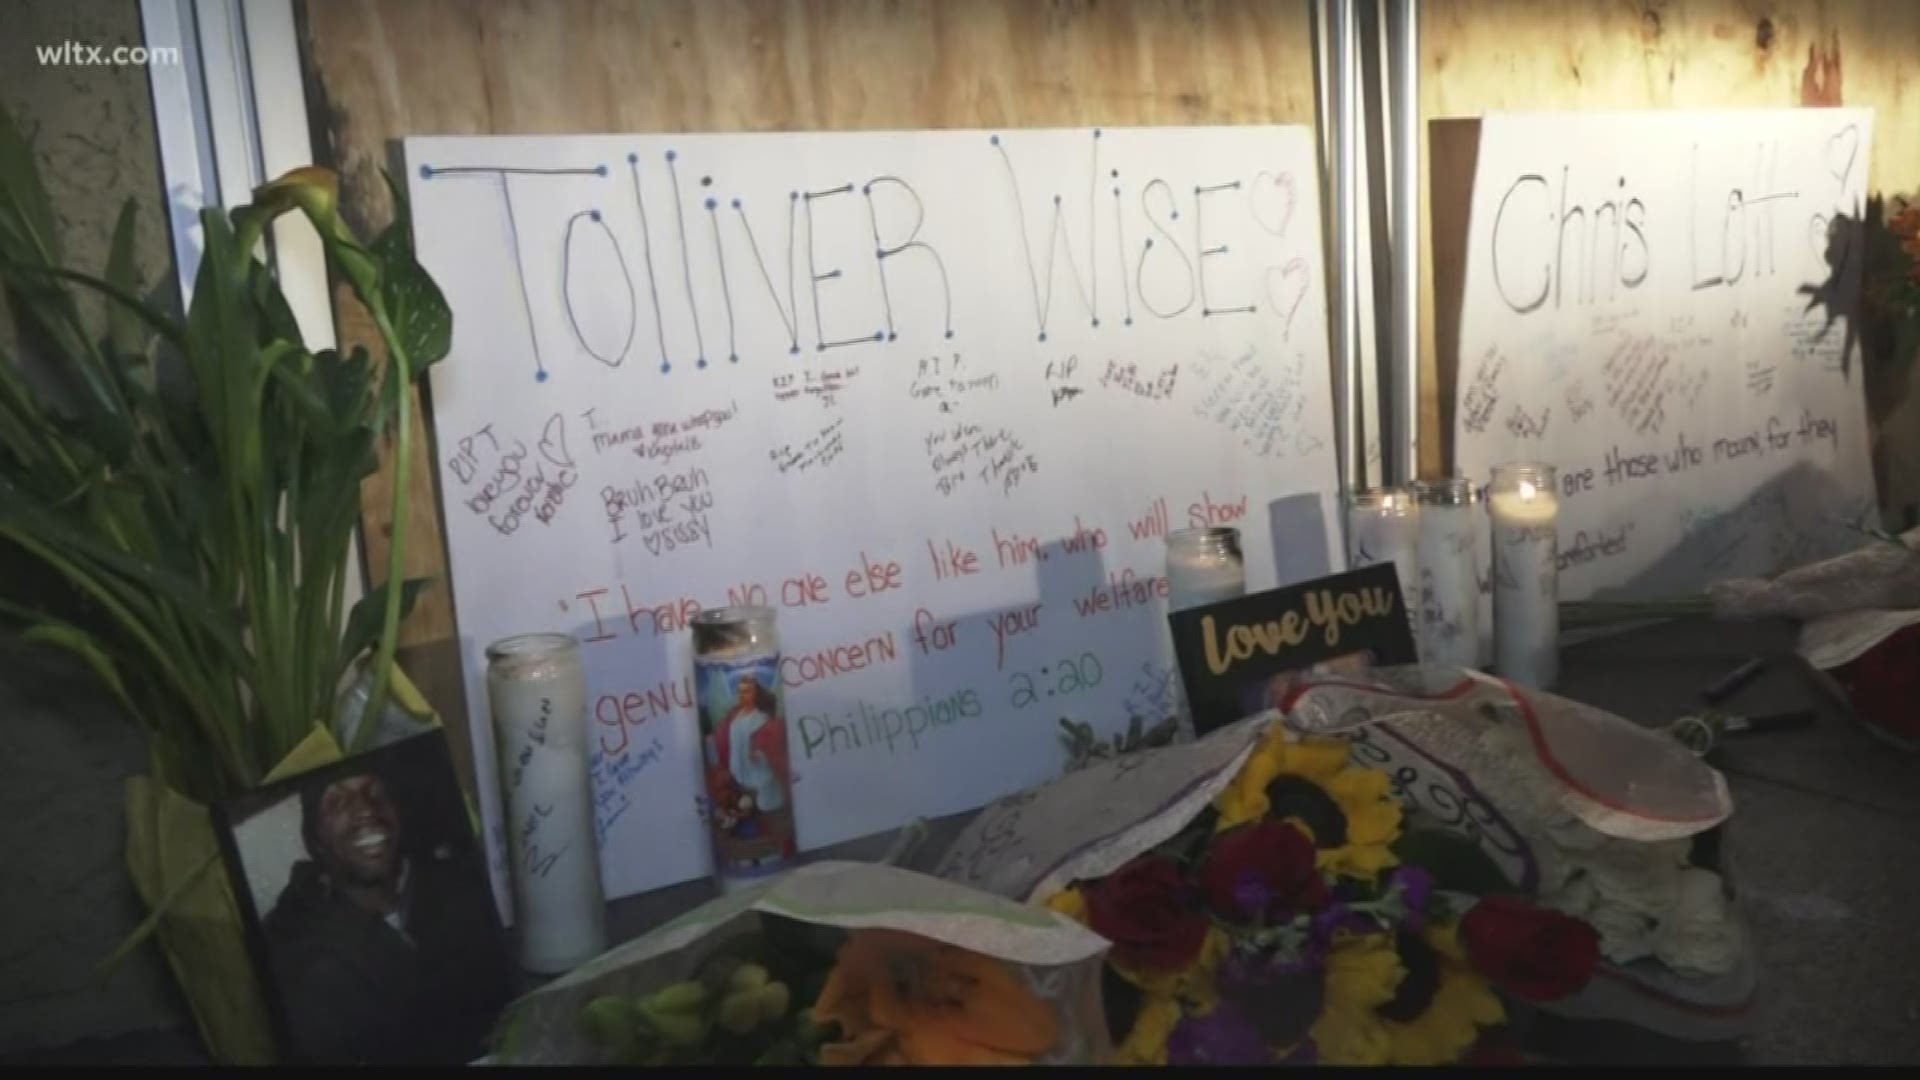 A group of friends honored the lives of 29-year-old Tolliver Wise and 36-year-old Christopher Lott, Jr., who lost their lives after a man opened fired in a Columbia sports bar.